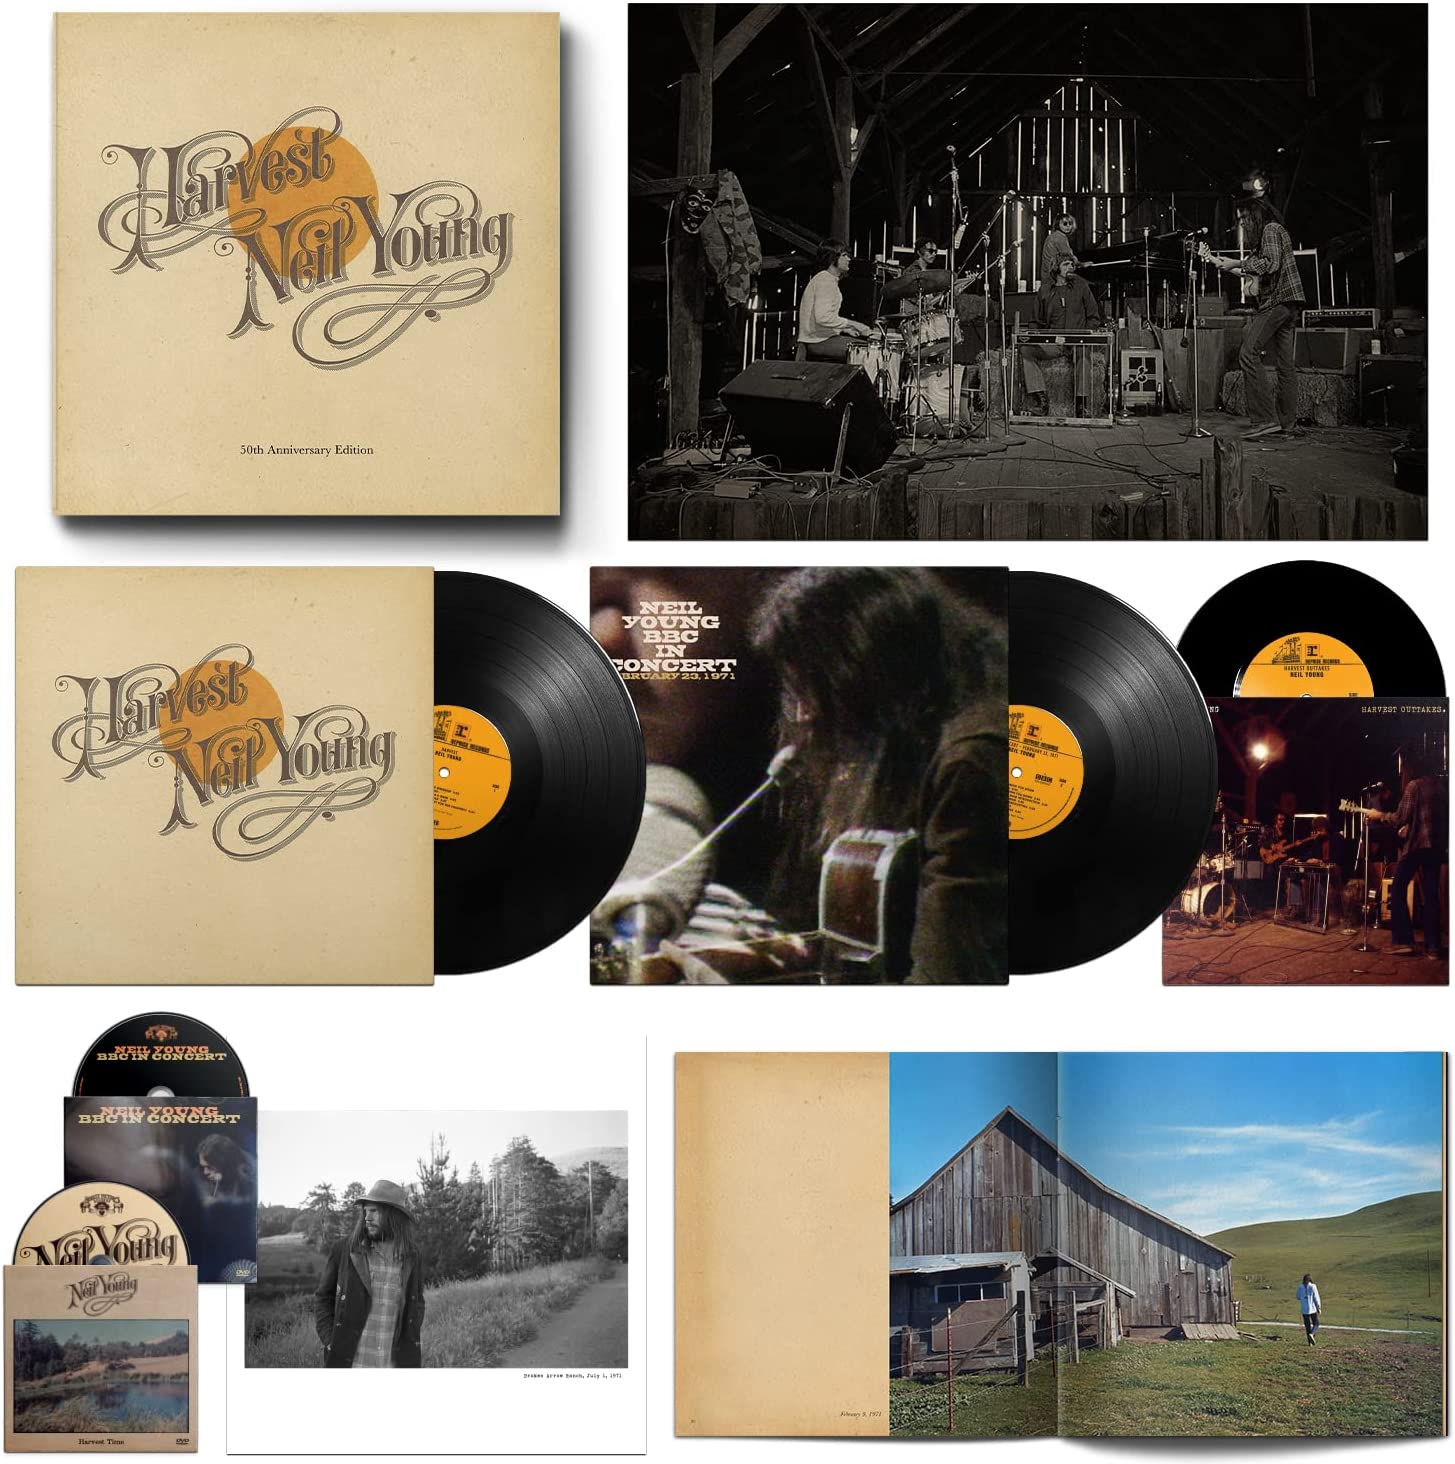 Young, Neil Harvest (50th Anniversary Edition) (lp+dvd)